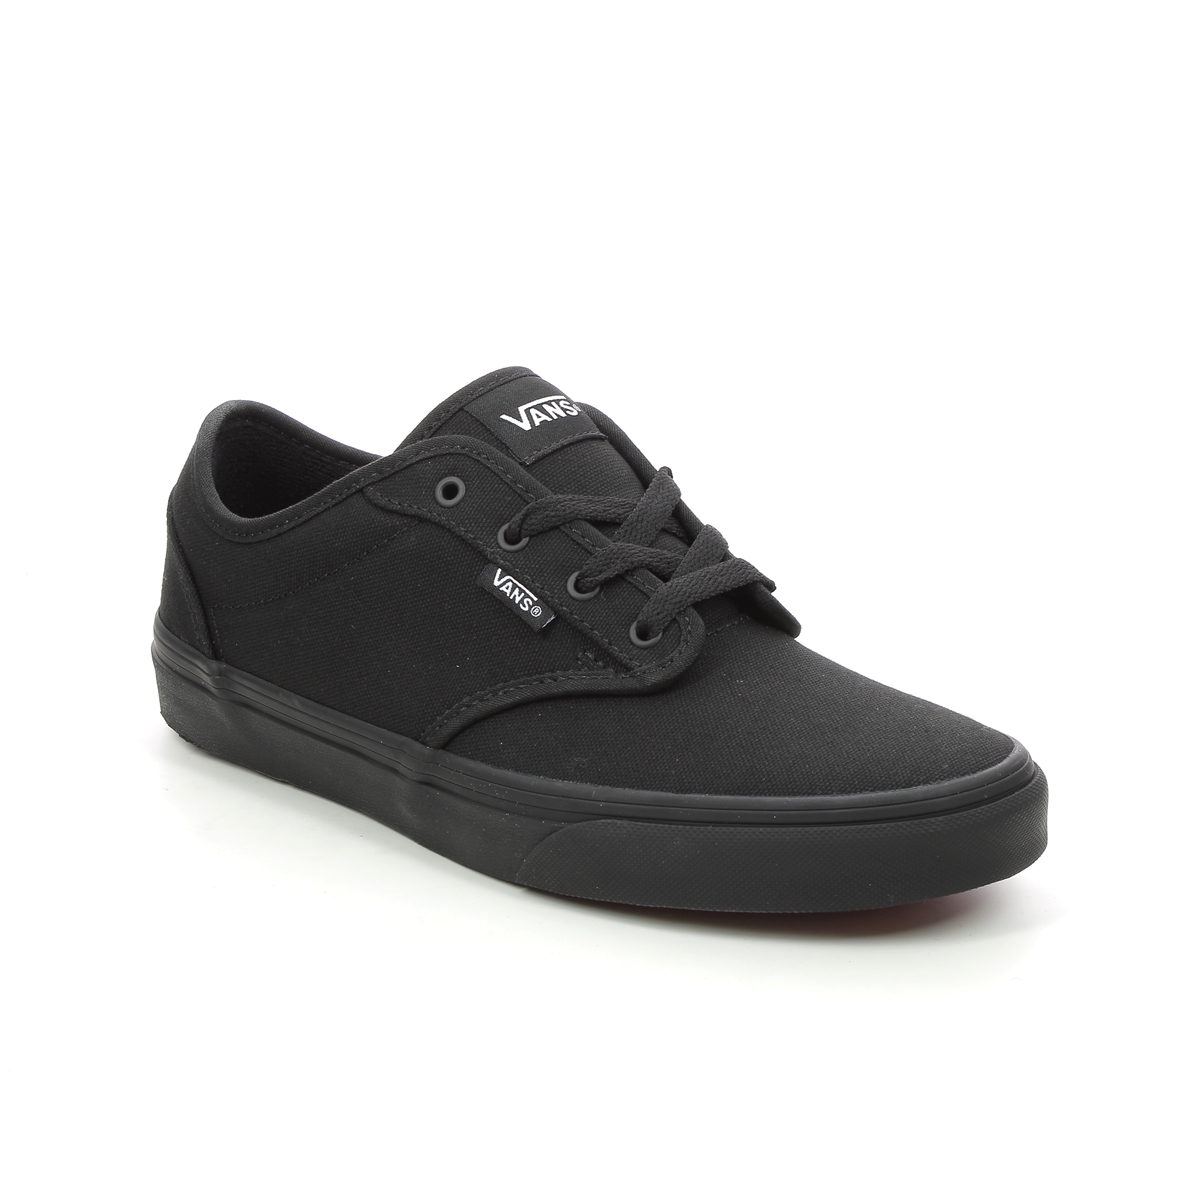 Vans Atwood Youth Black Kids Trainers  Vki5186 In Size 2 In Plain Black Vans Boys Trainers For School For kids